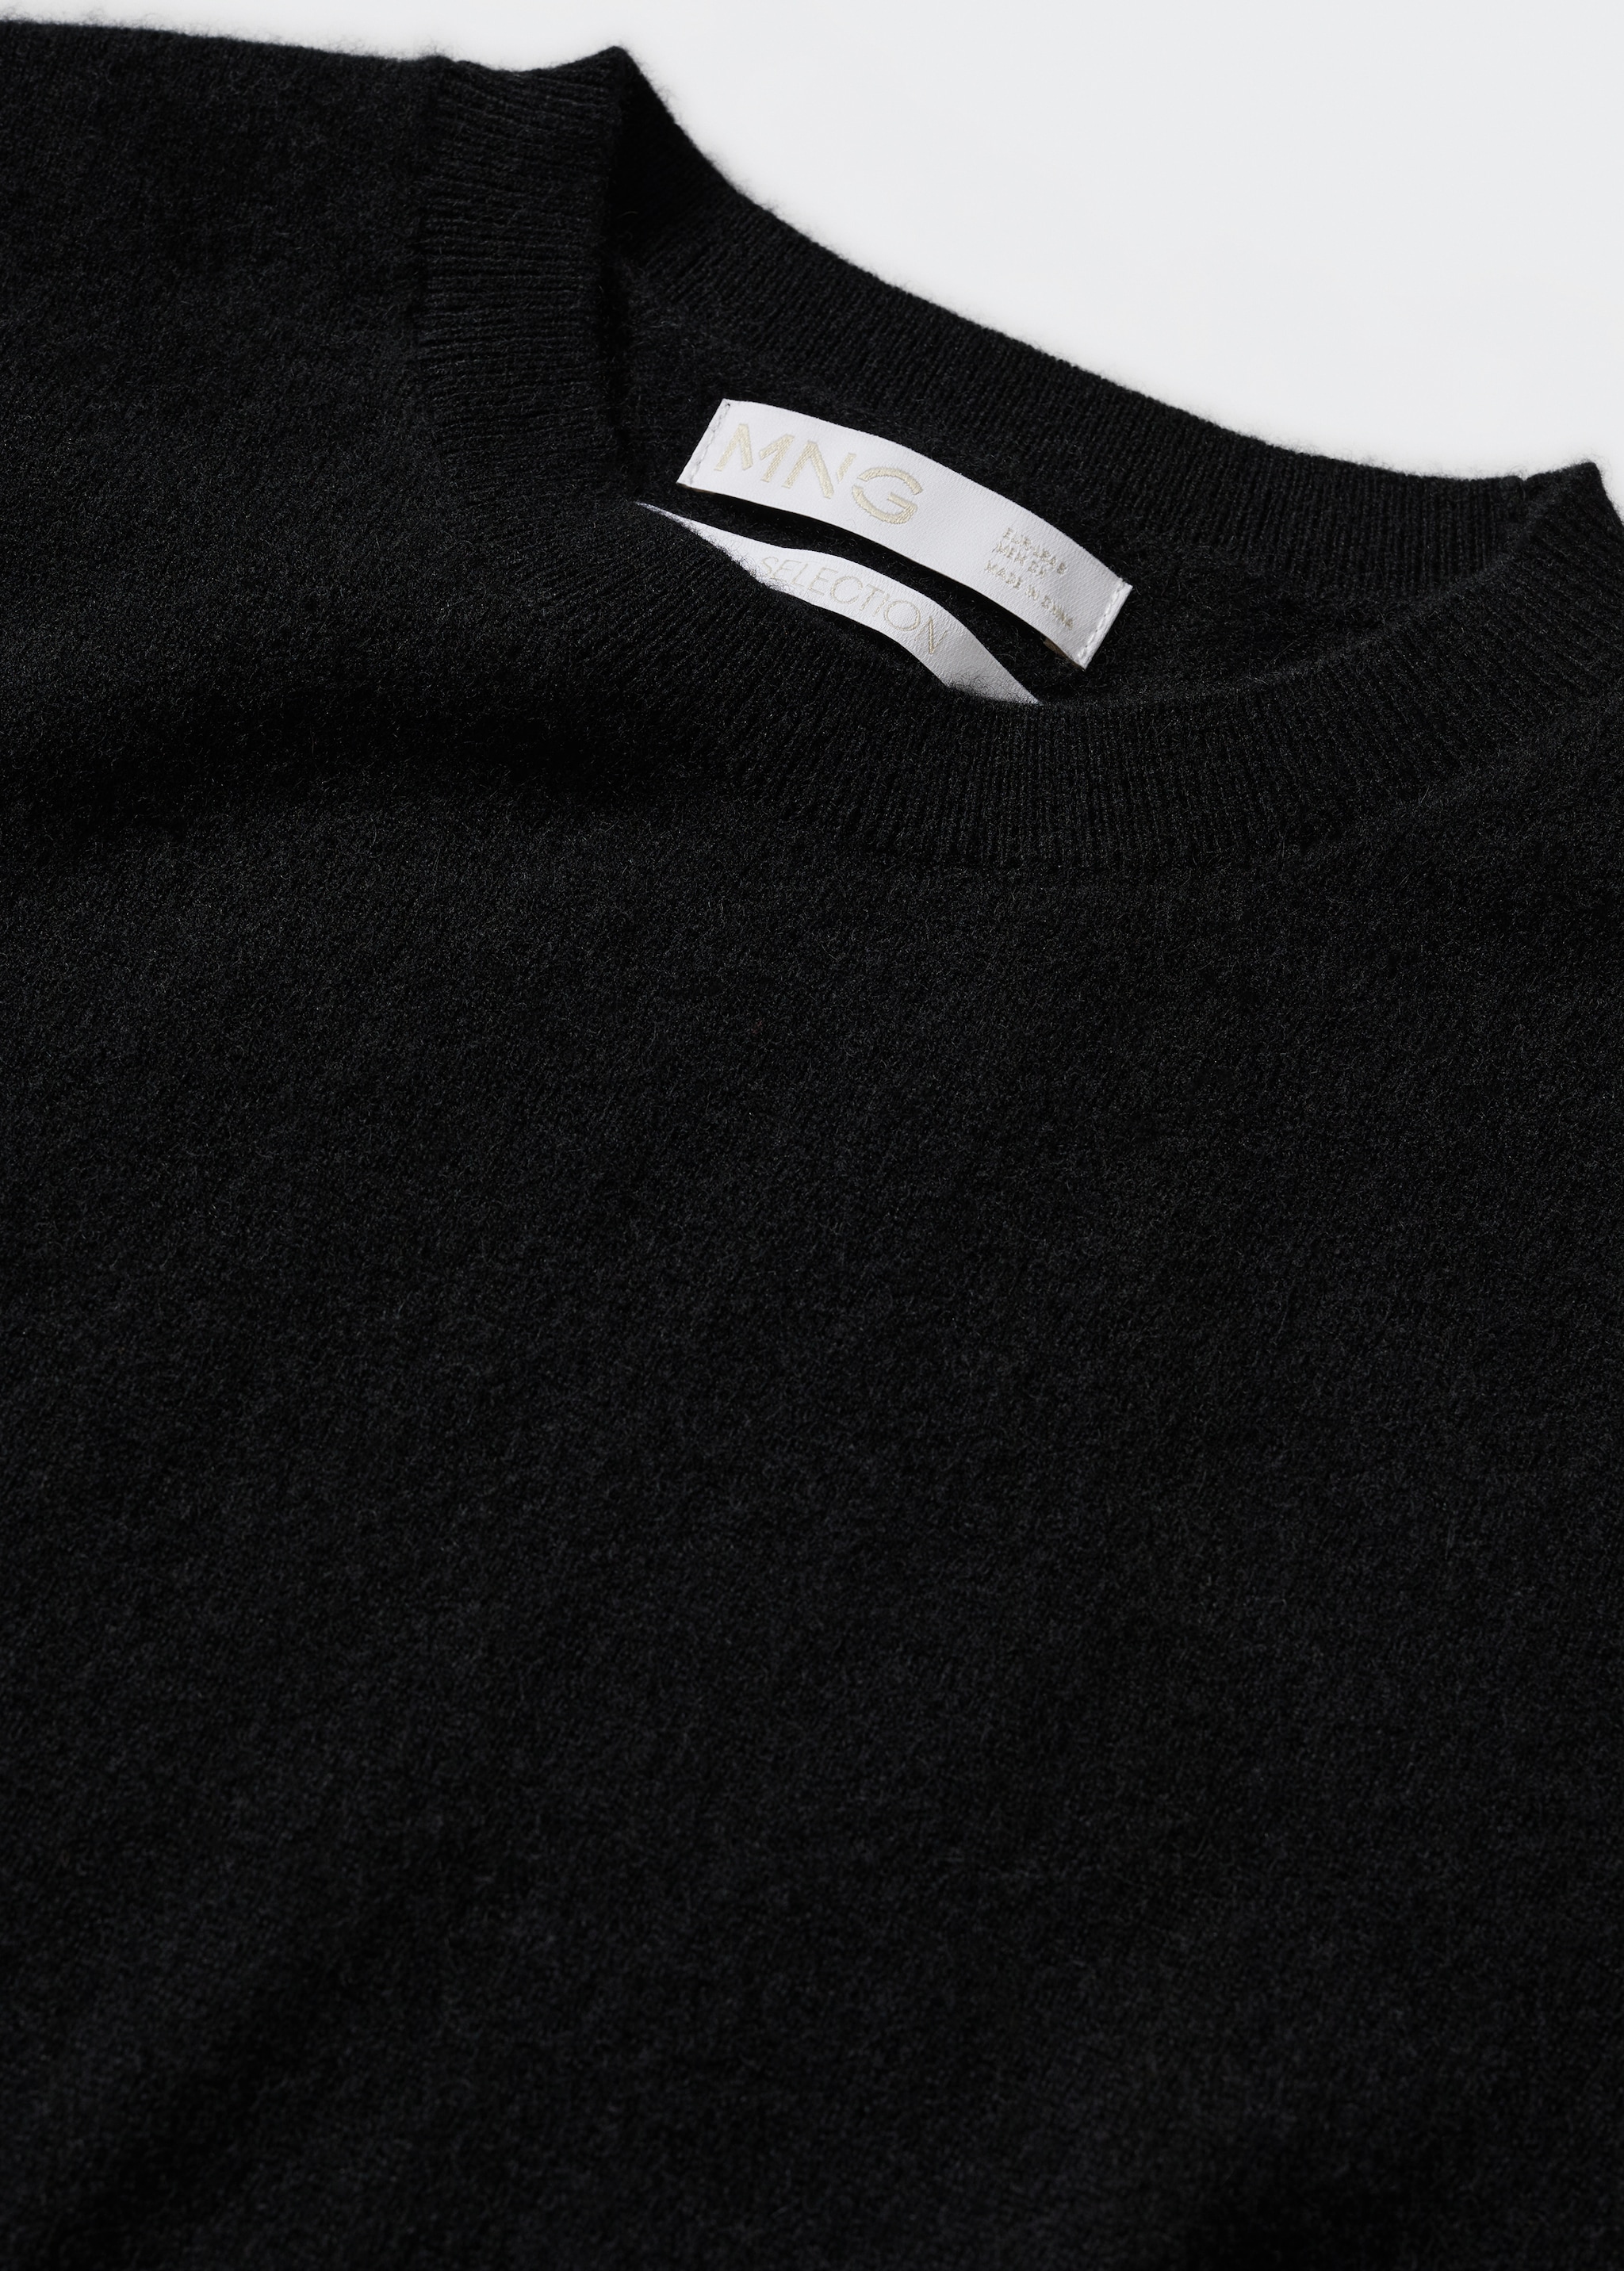 100% cashmere sweater - Details of the article 8